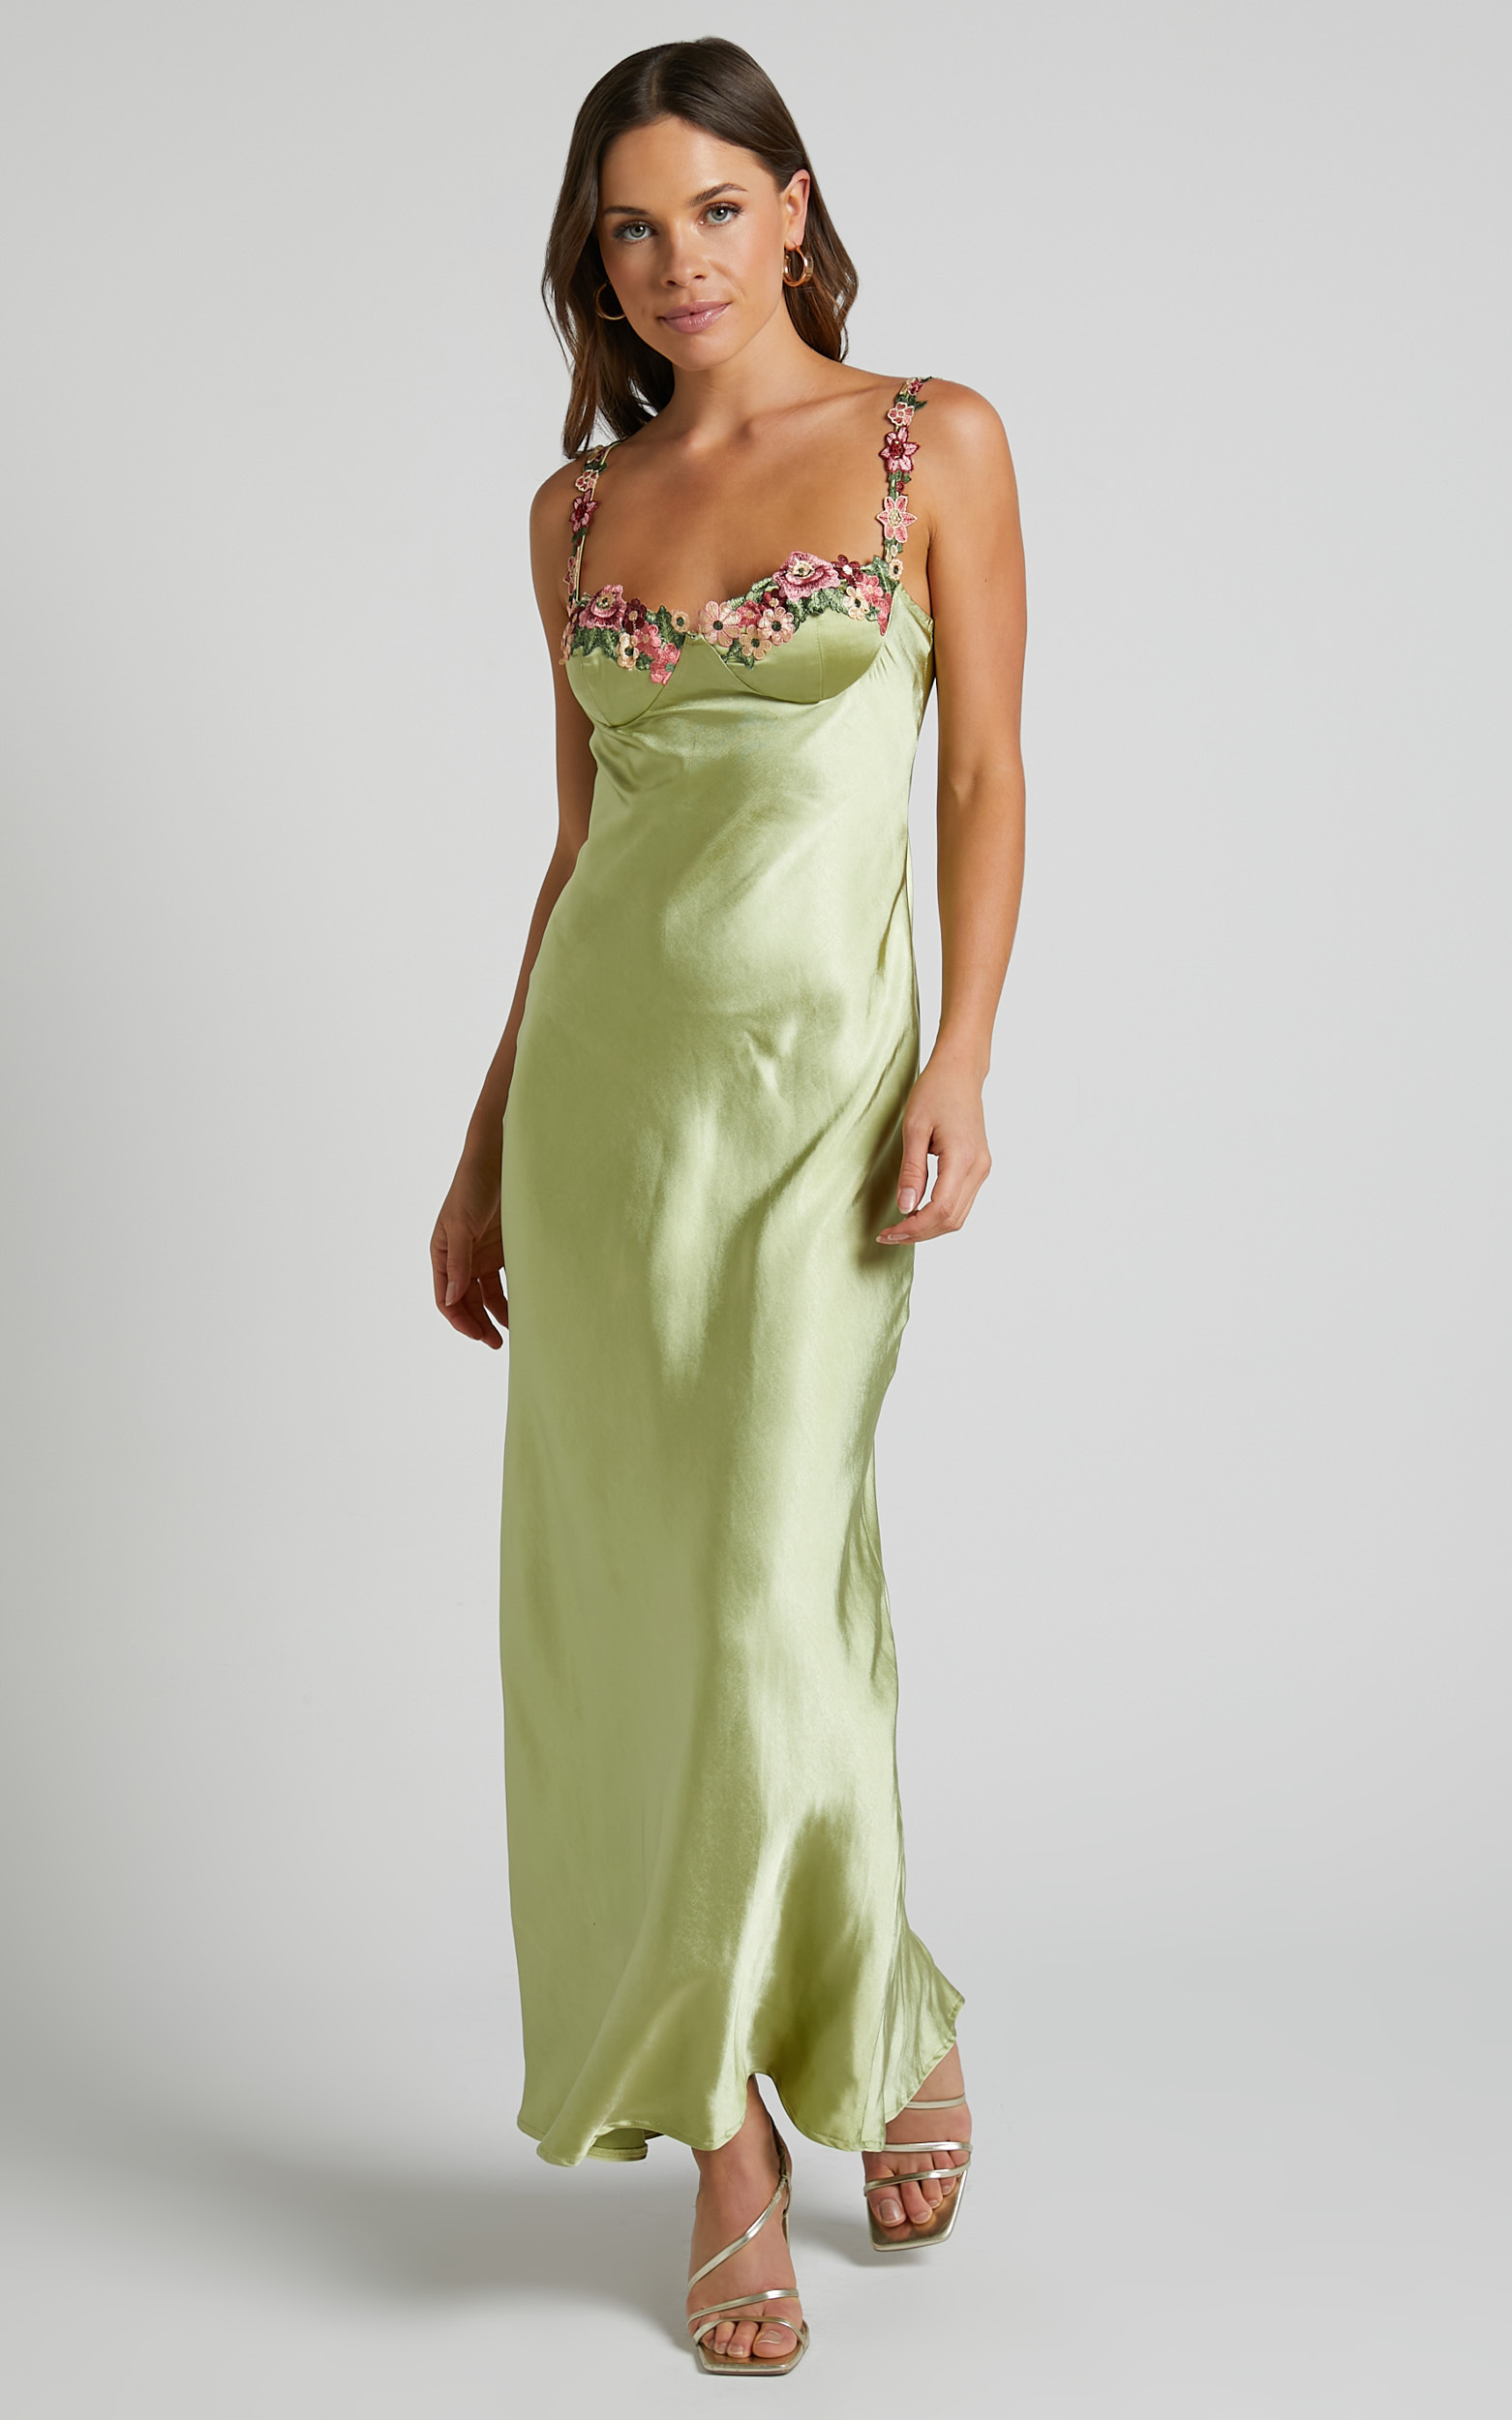 Harmony Floral Detail Cup Bust Satin Maxi Dress in Citrus | Showpo